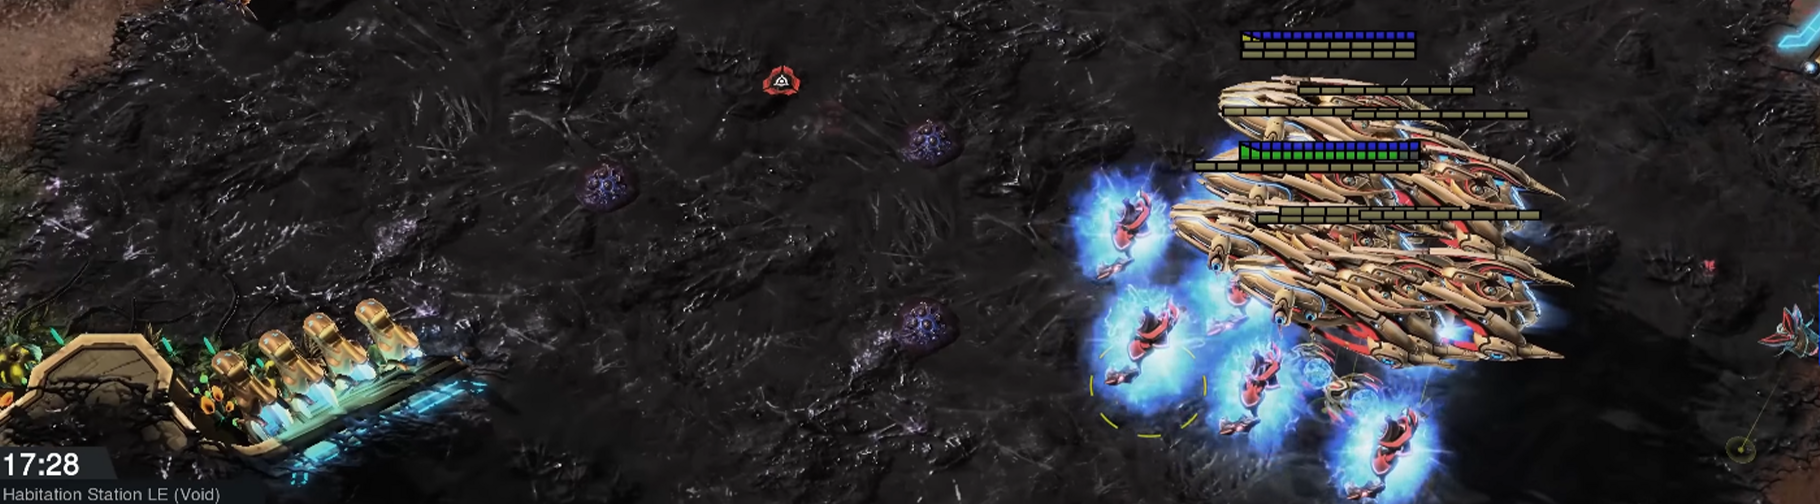 A clumped up army of Protoss units composed of Carriers, Archons, and Sentries moving on Zerg creep